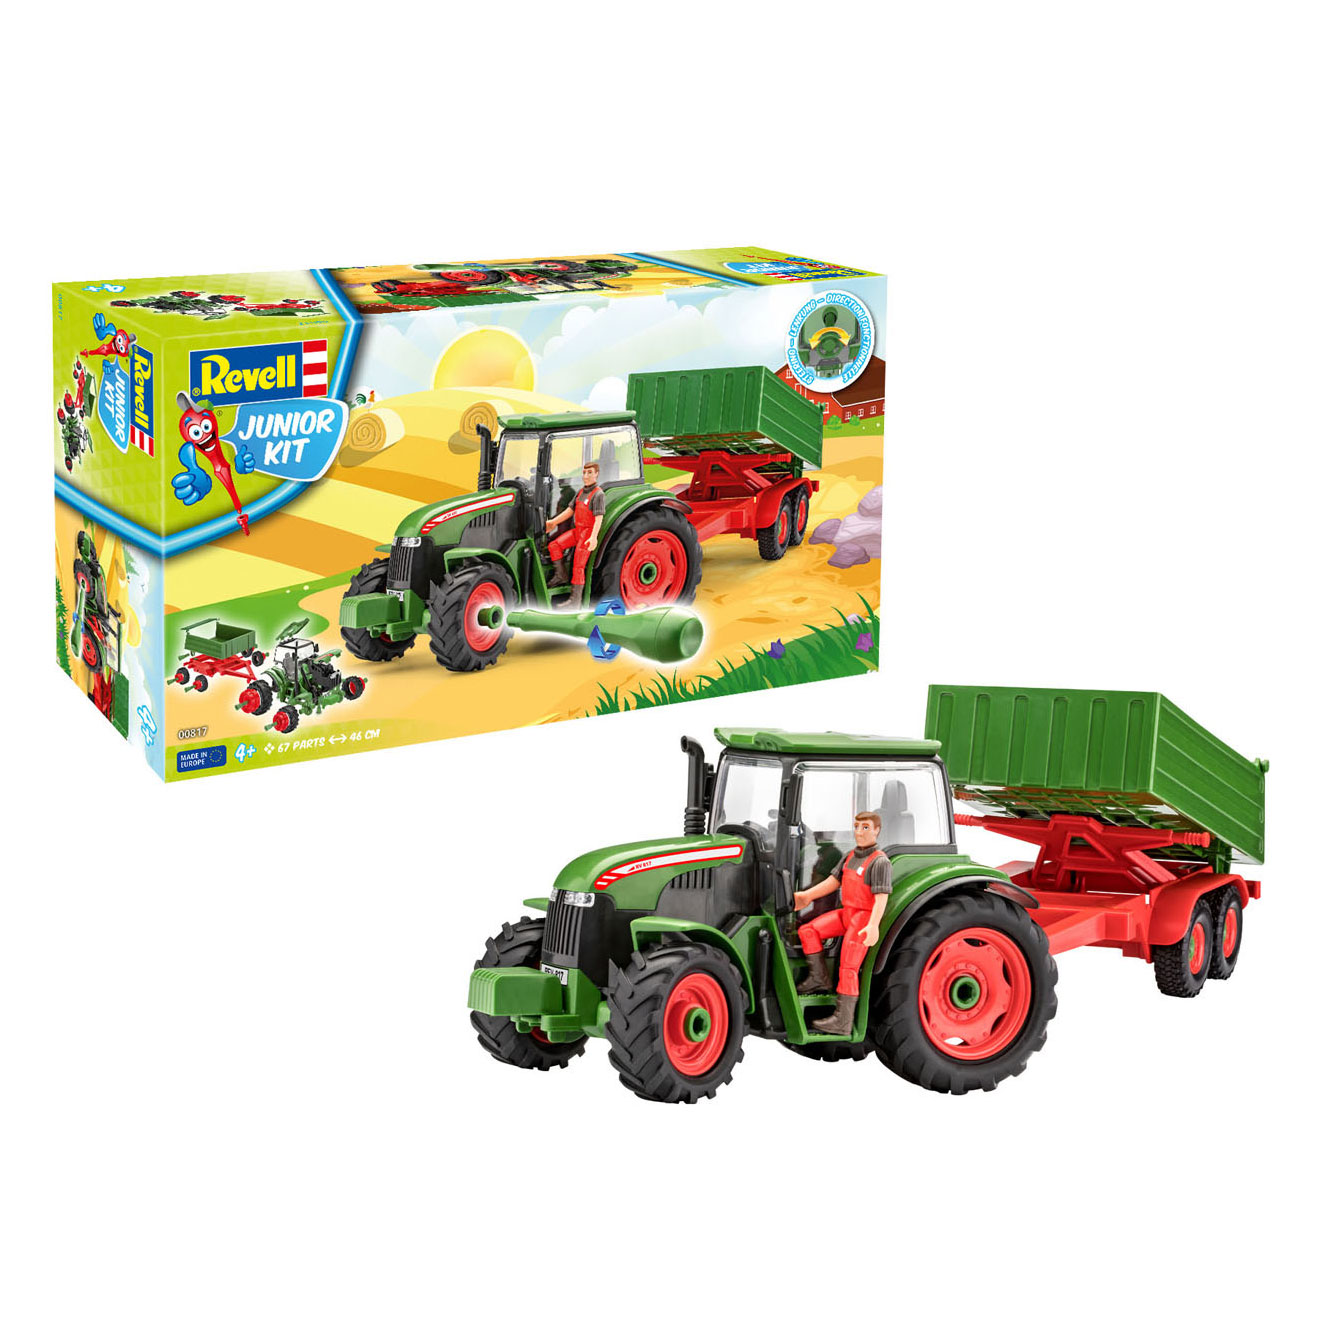 Revell Junior Model Kit Tractor & Trailer with Figure 00817 Scale 1:20 Ages 4+